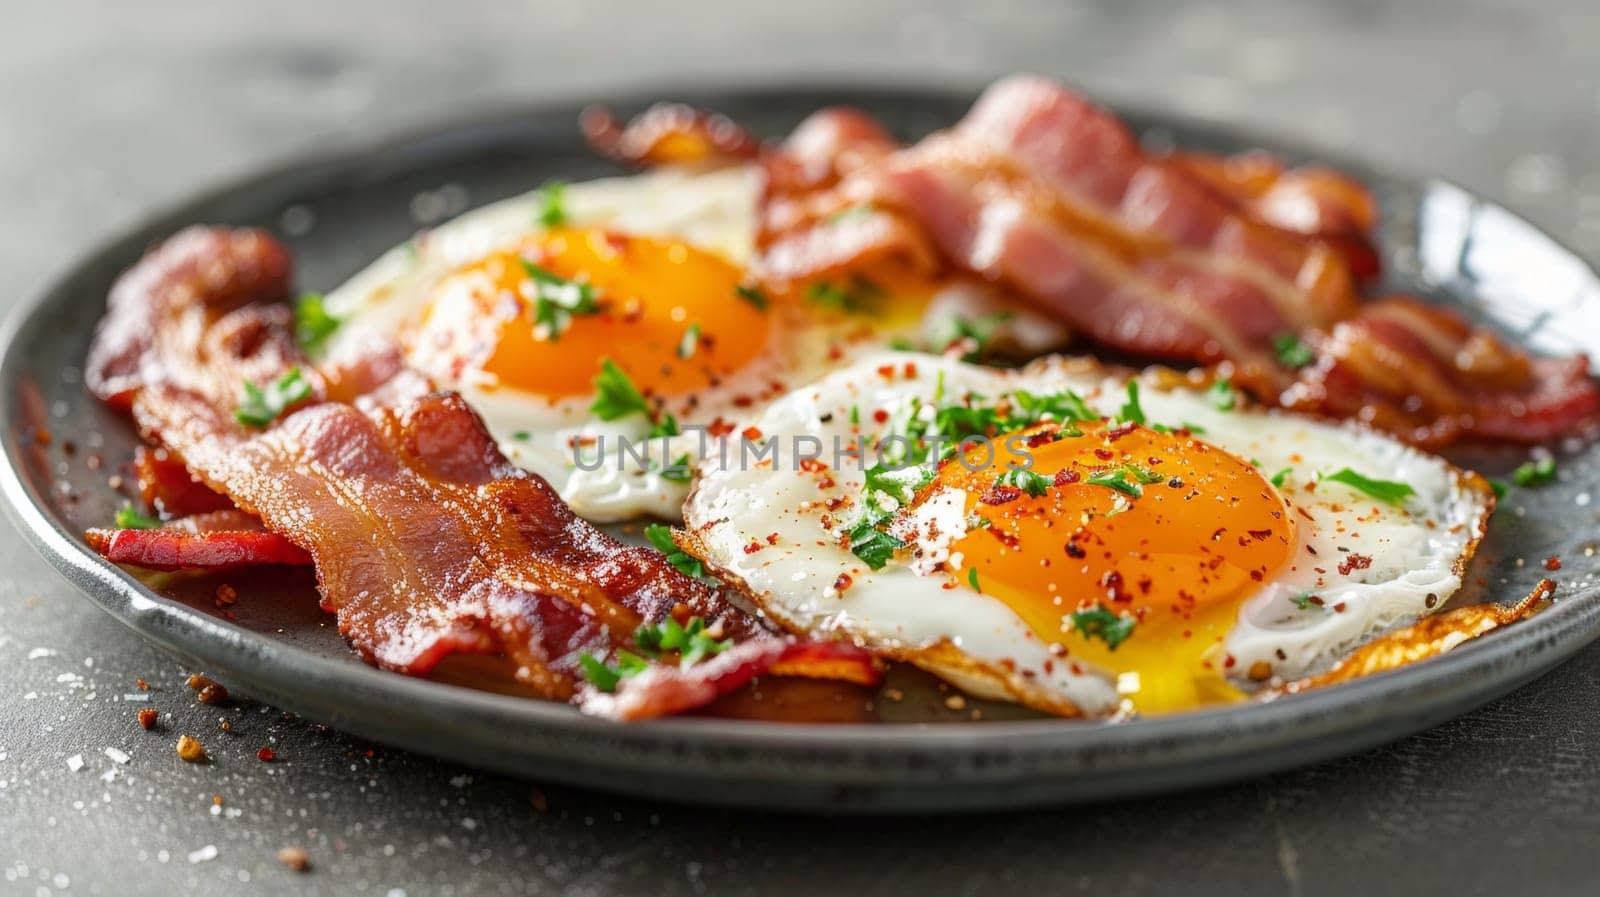 A plate of bacon and eggs on a black table, AI by starush